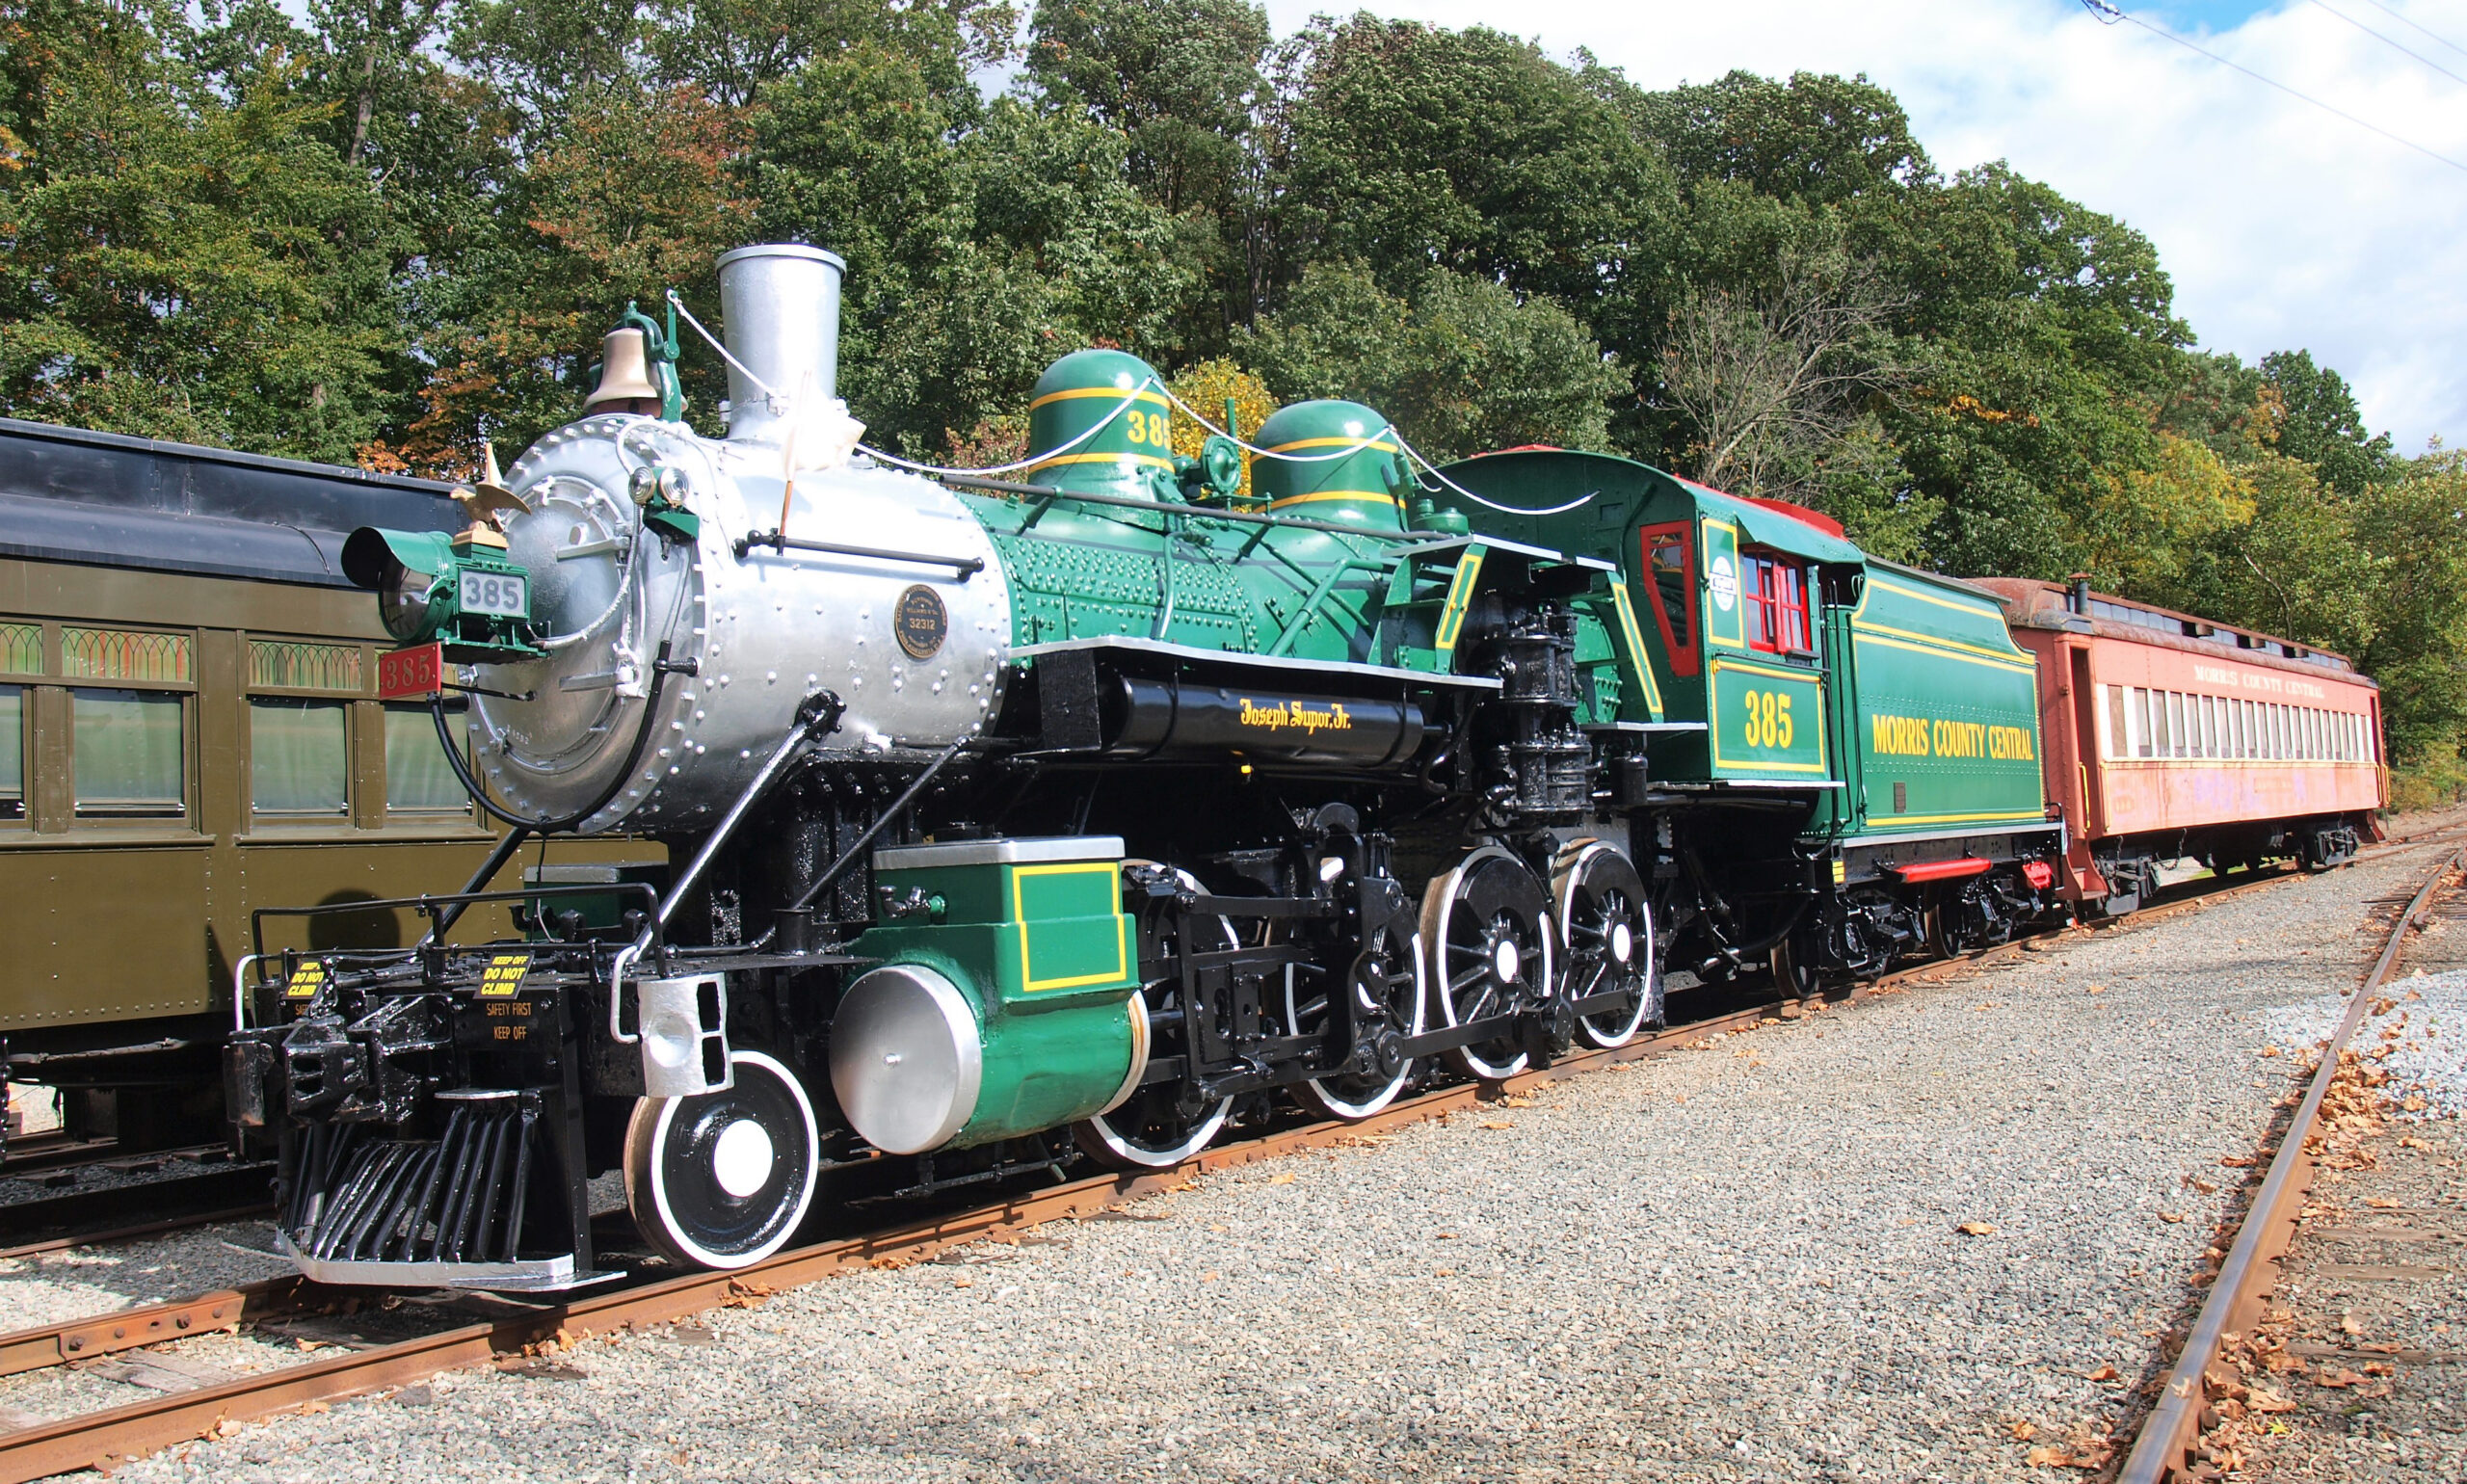 Steam locomotive with green and gold paint coupled to heavyweight passenger car